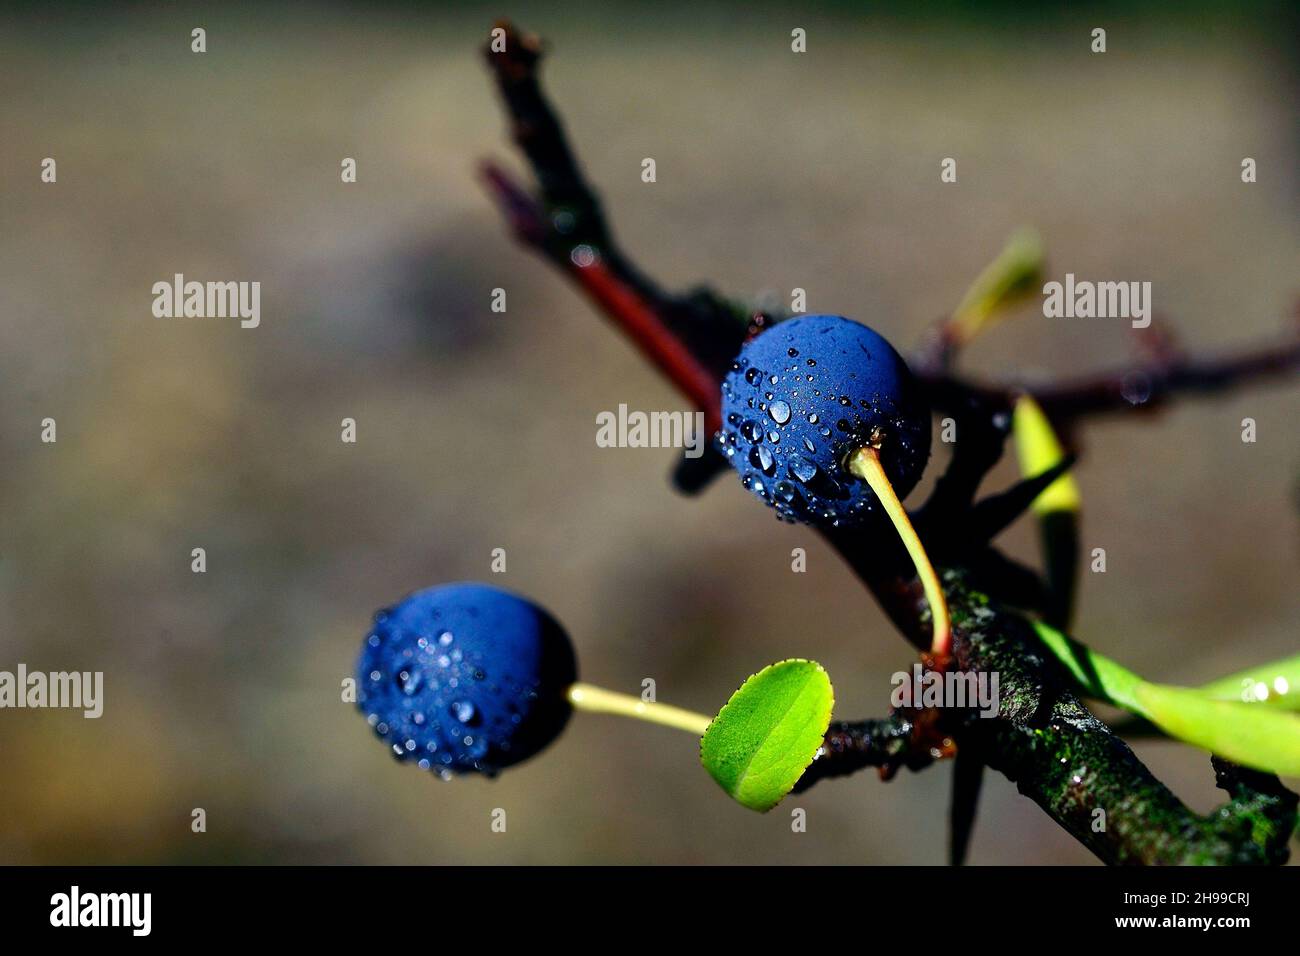 Prunus spinosa, the blackthorn, is a species of shrub in the Rosaceae family. Stock Photo